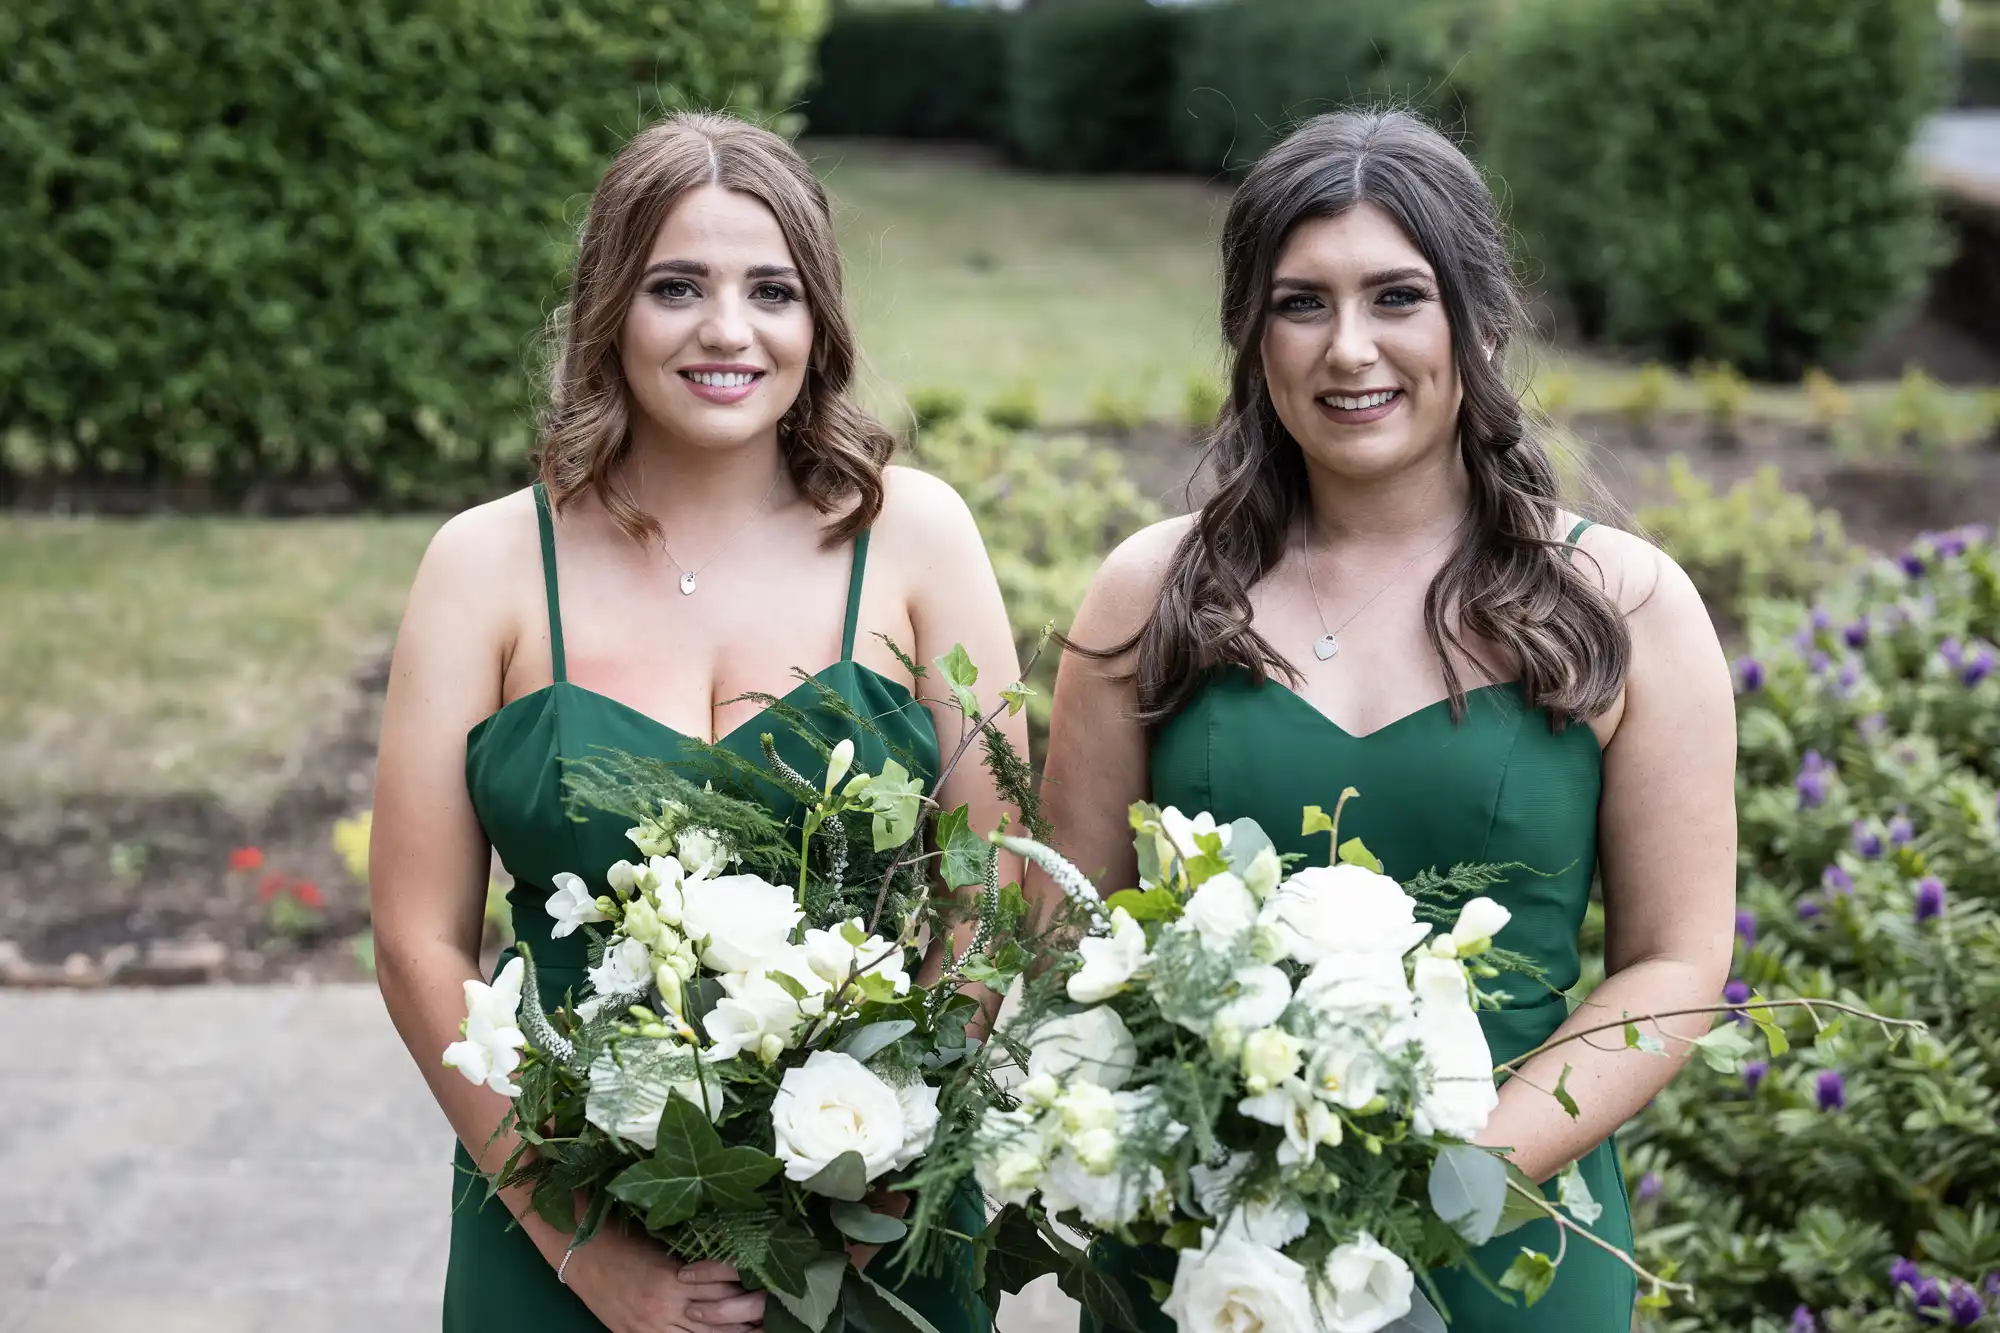 Two women in green dresses holding bouquets, standing in a garden.